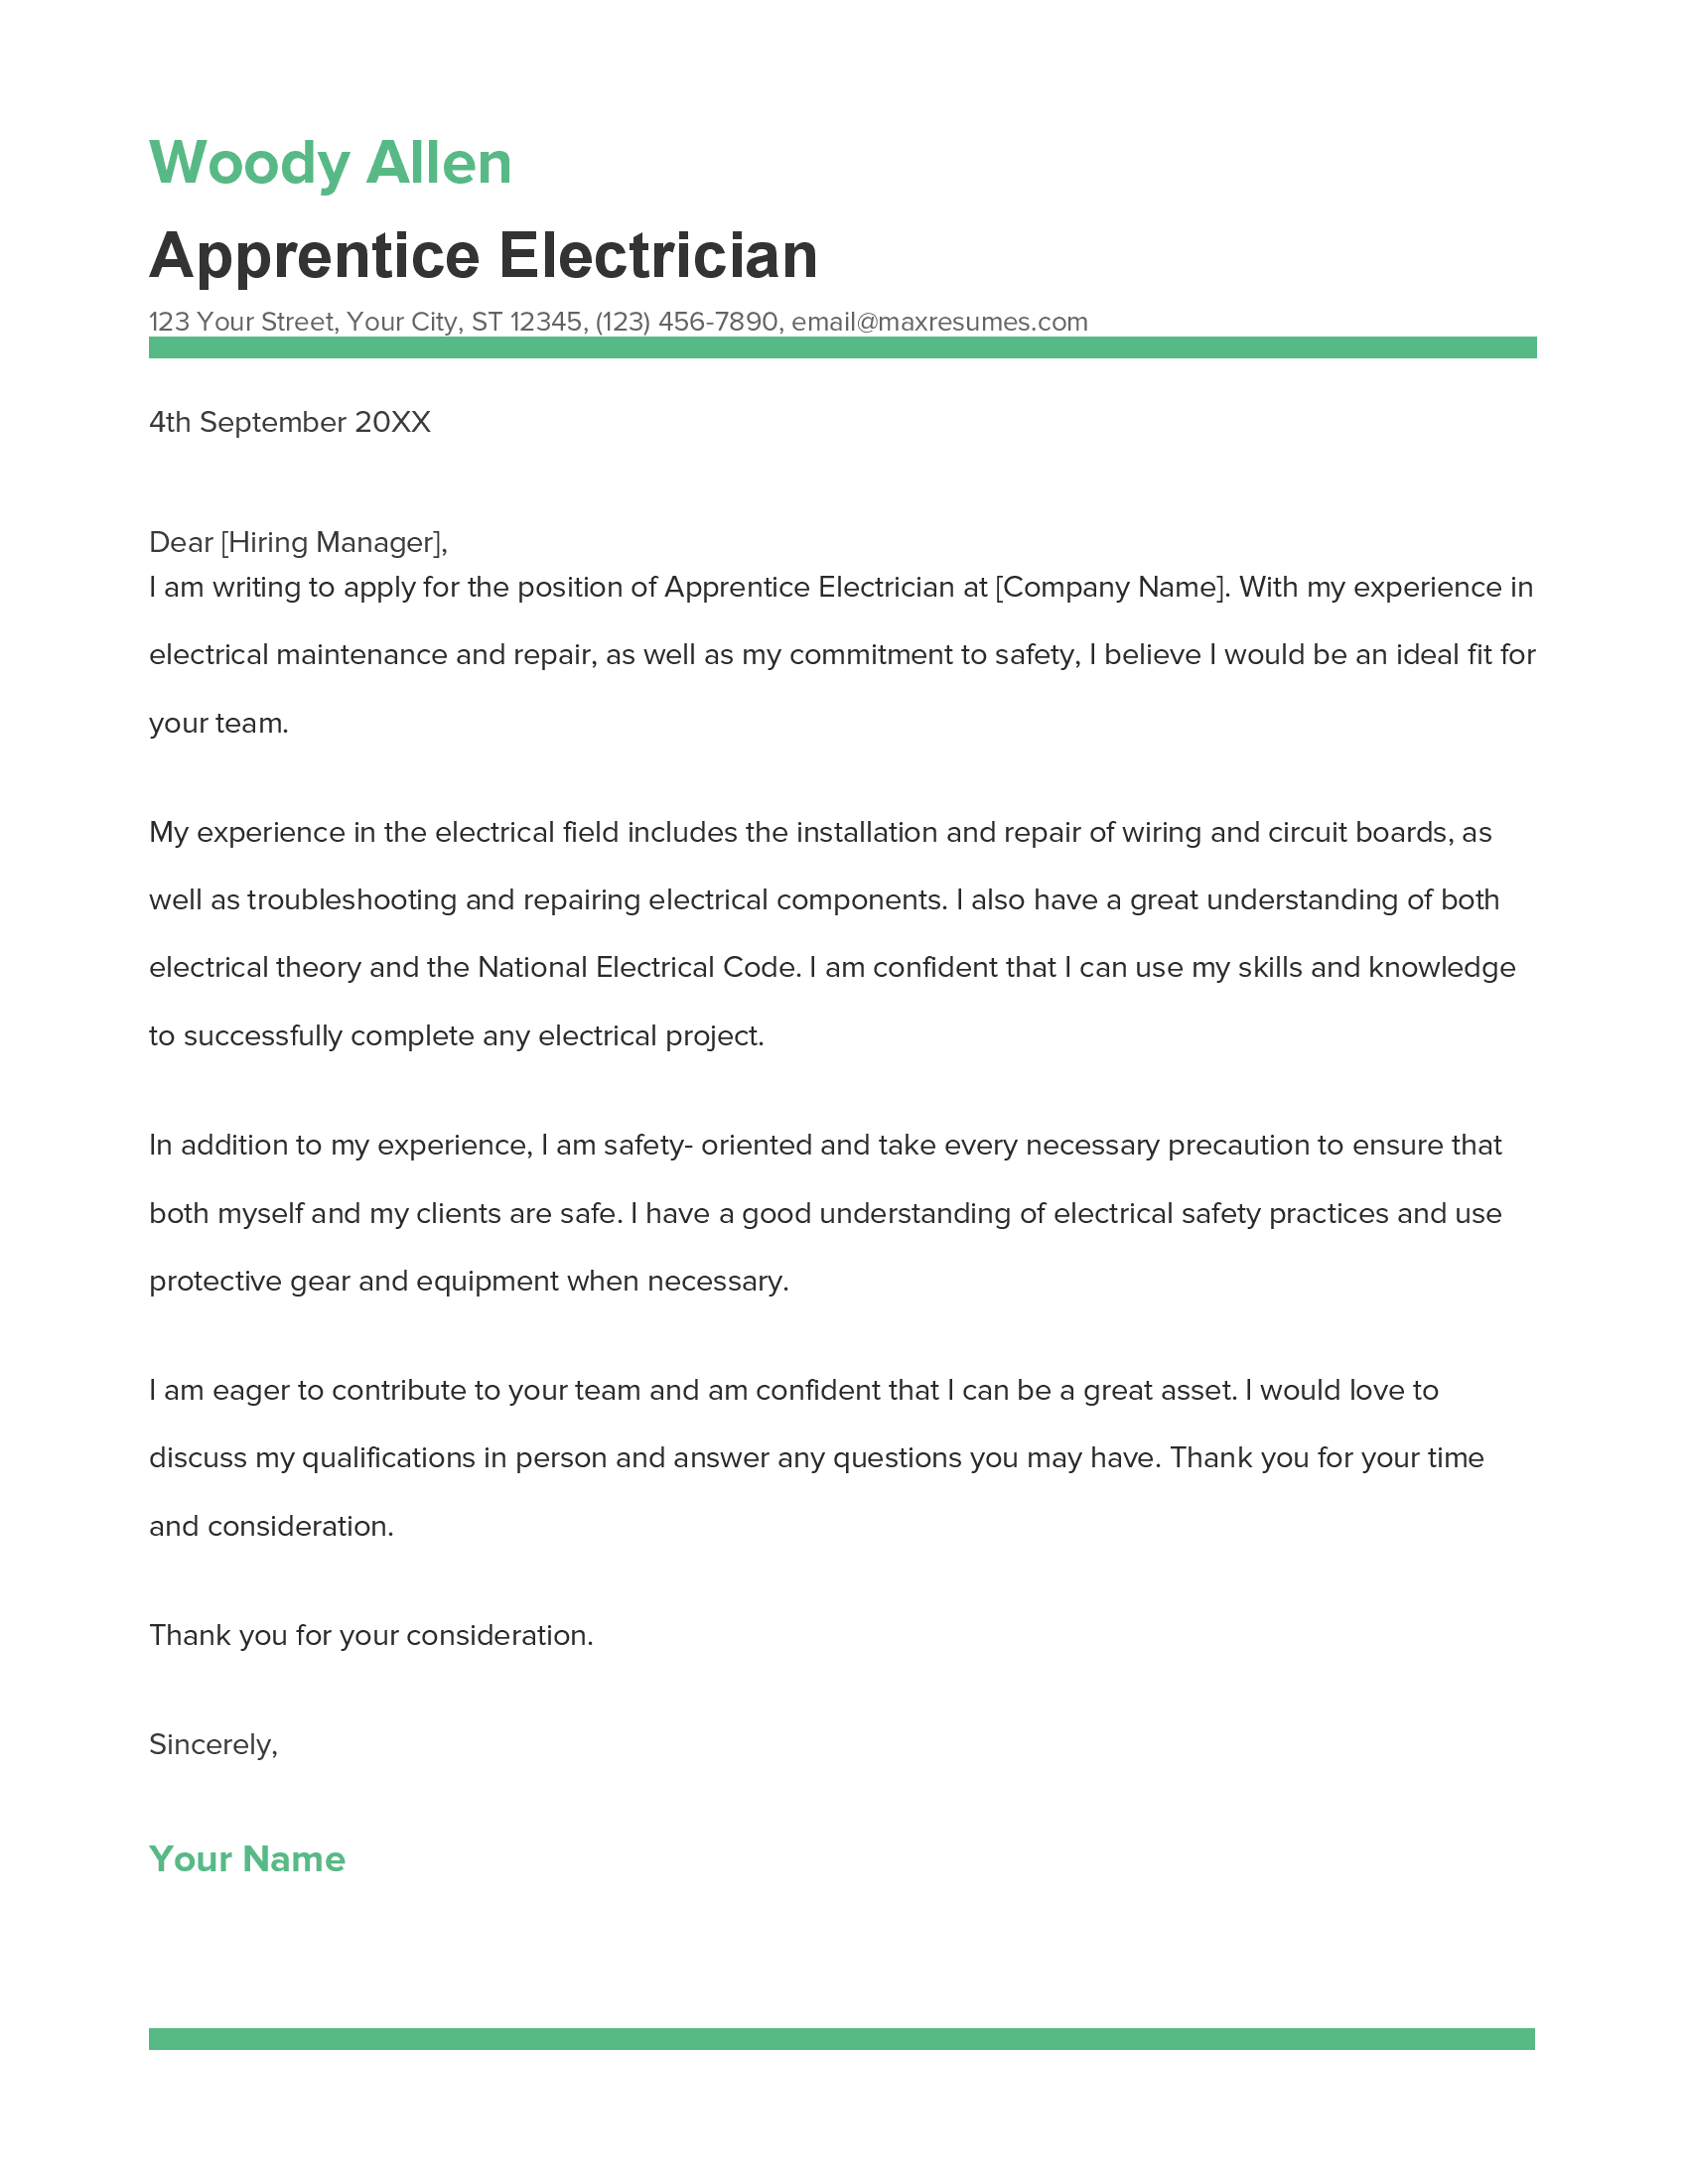 cover letter for electrician apprentice